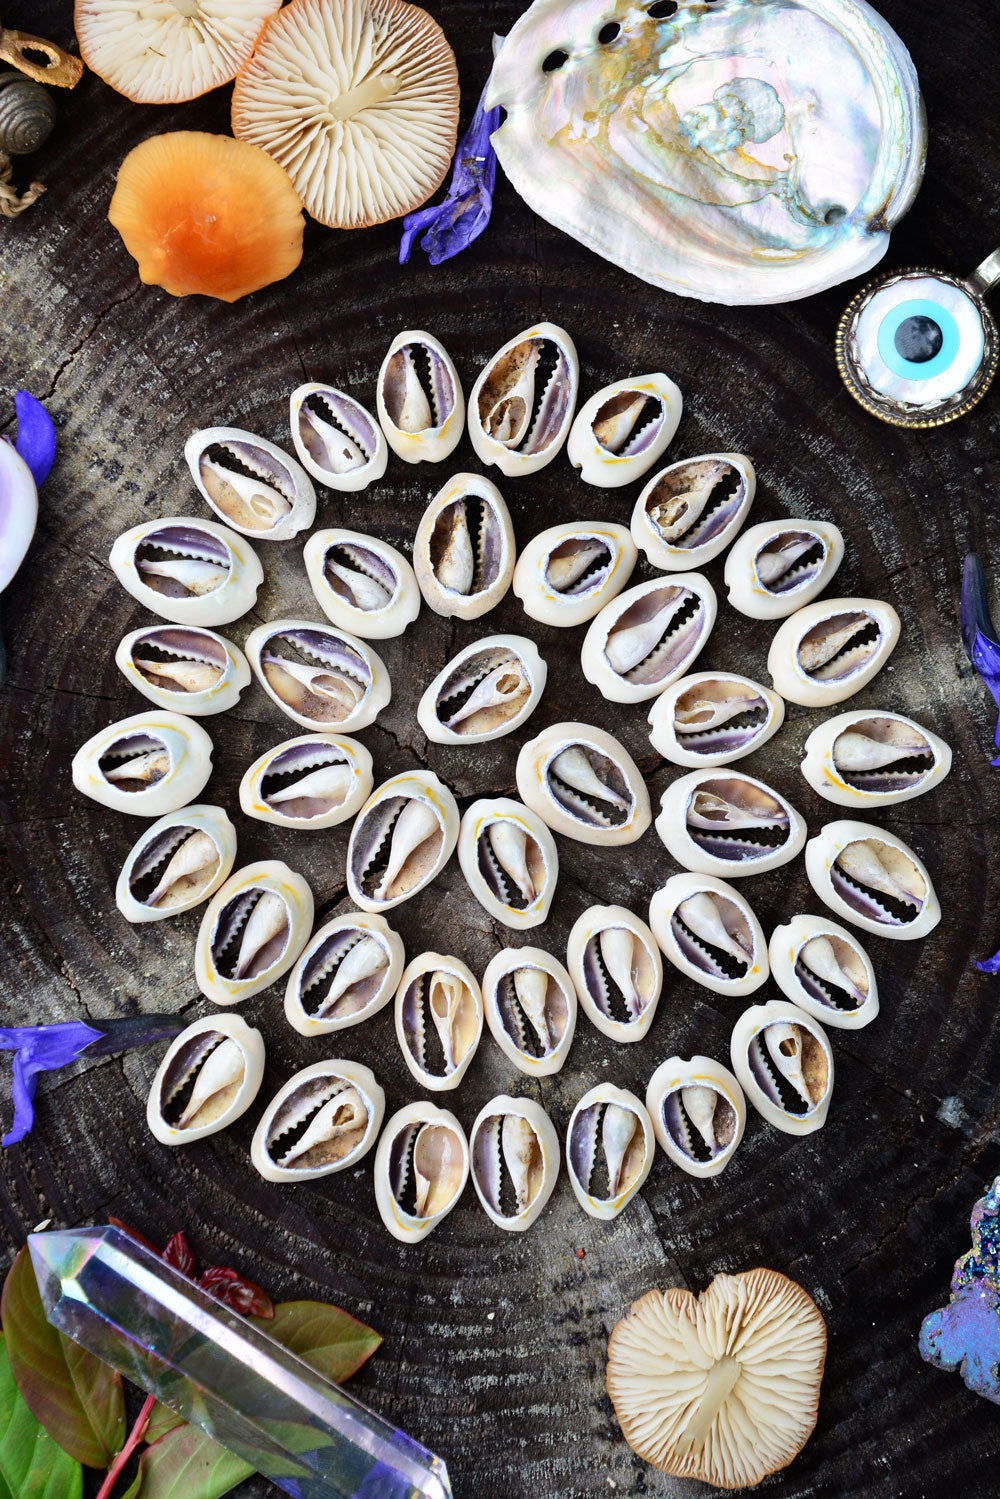 The Power of Cowrie Shells: An Overview of Their Meaning and Use